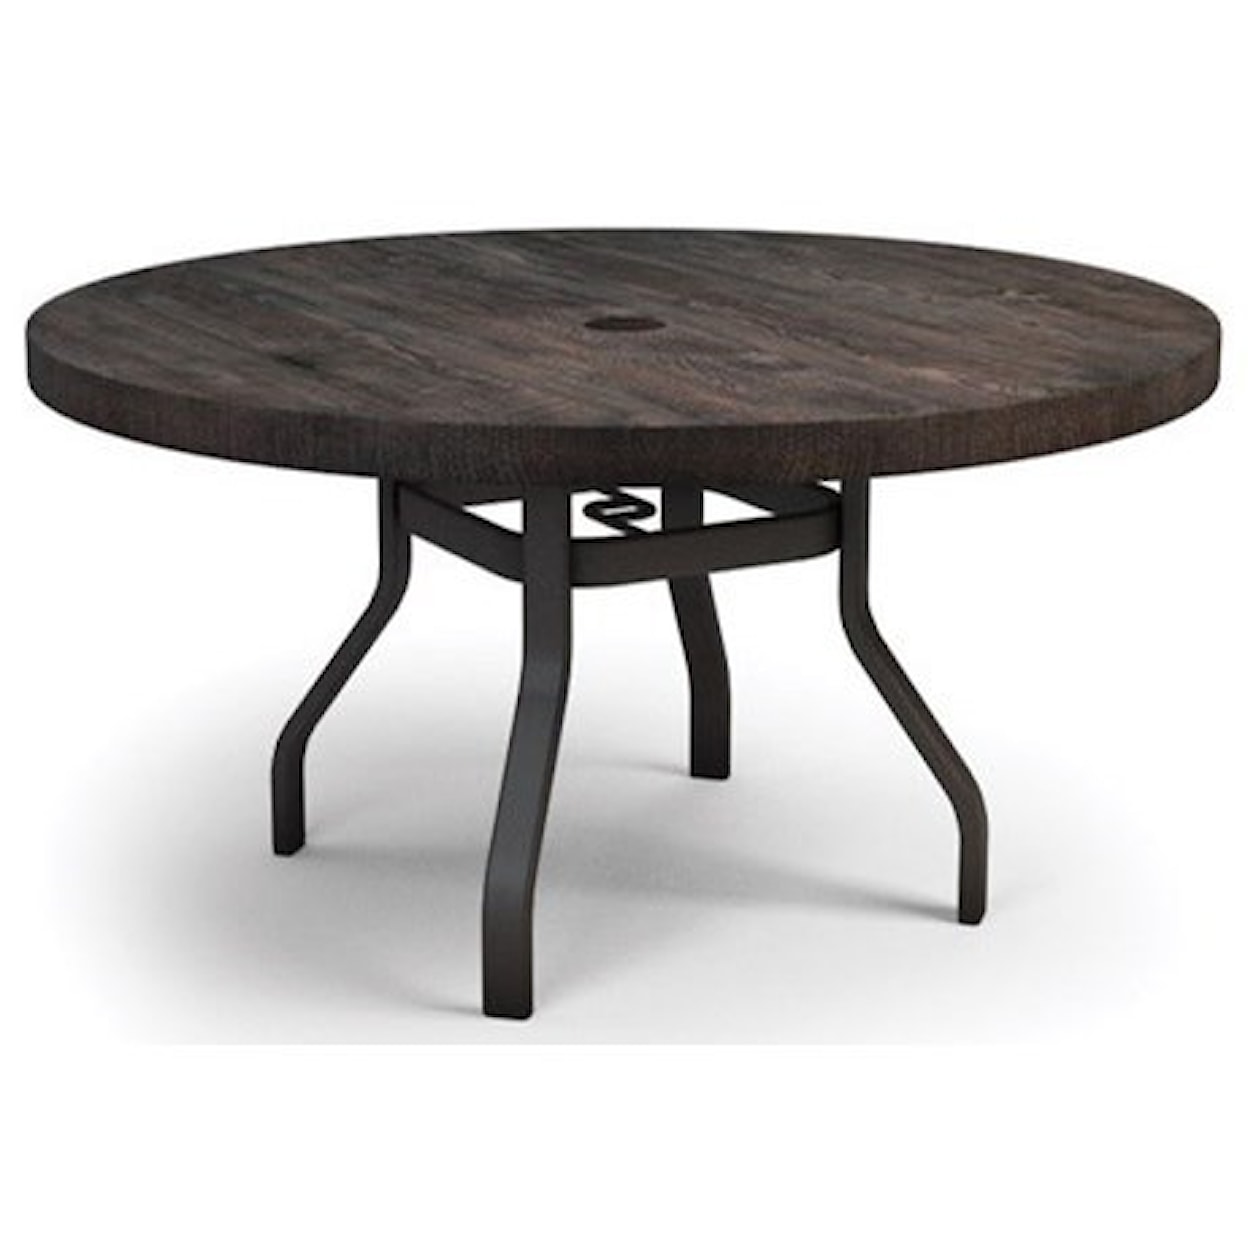 Homecrest Timber 54 Inch Dining Table